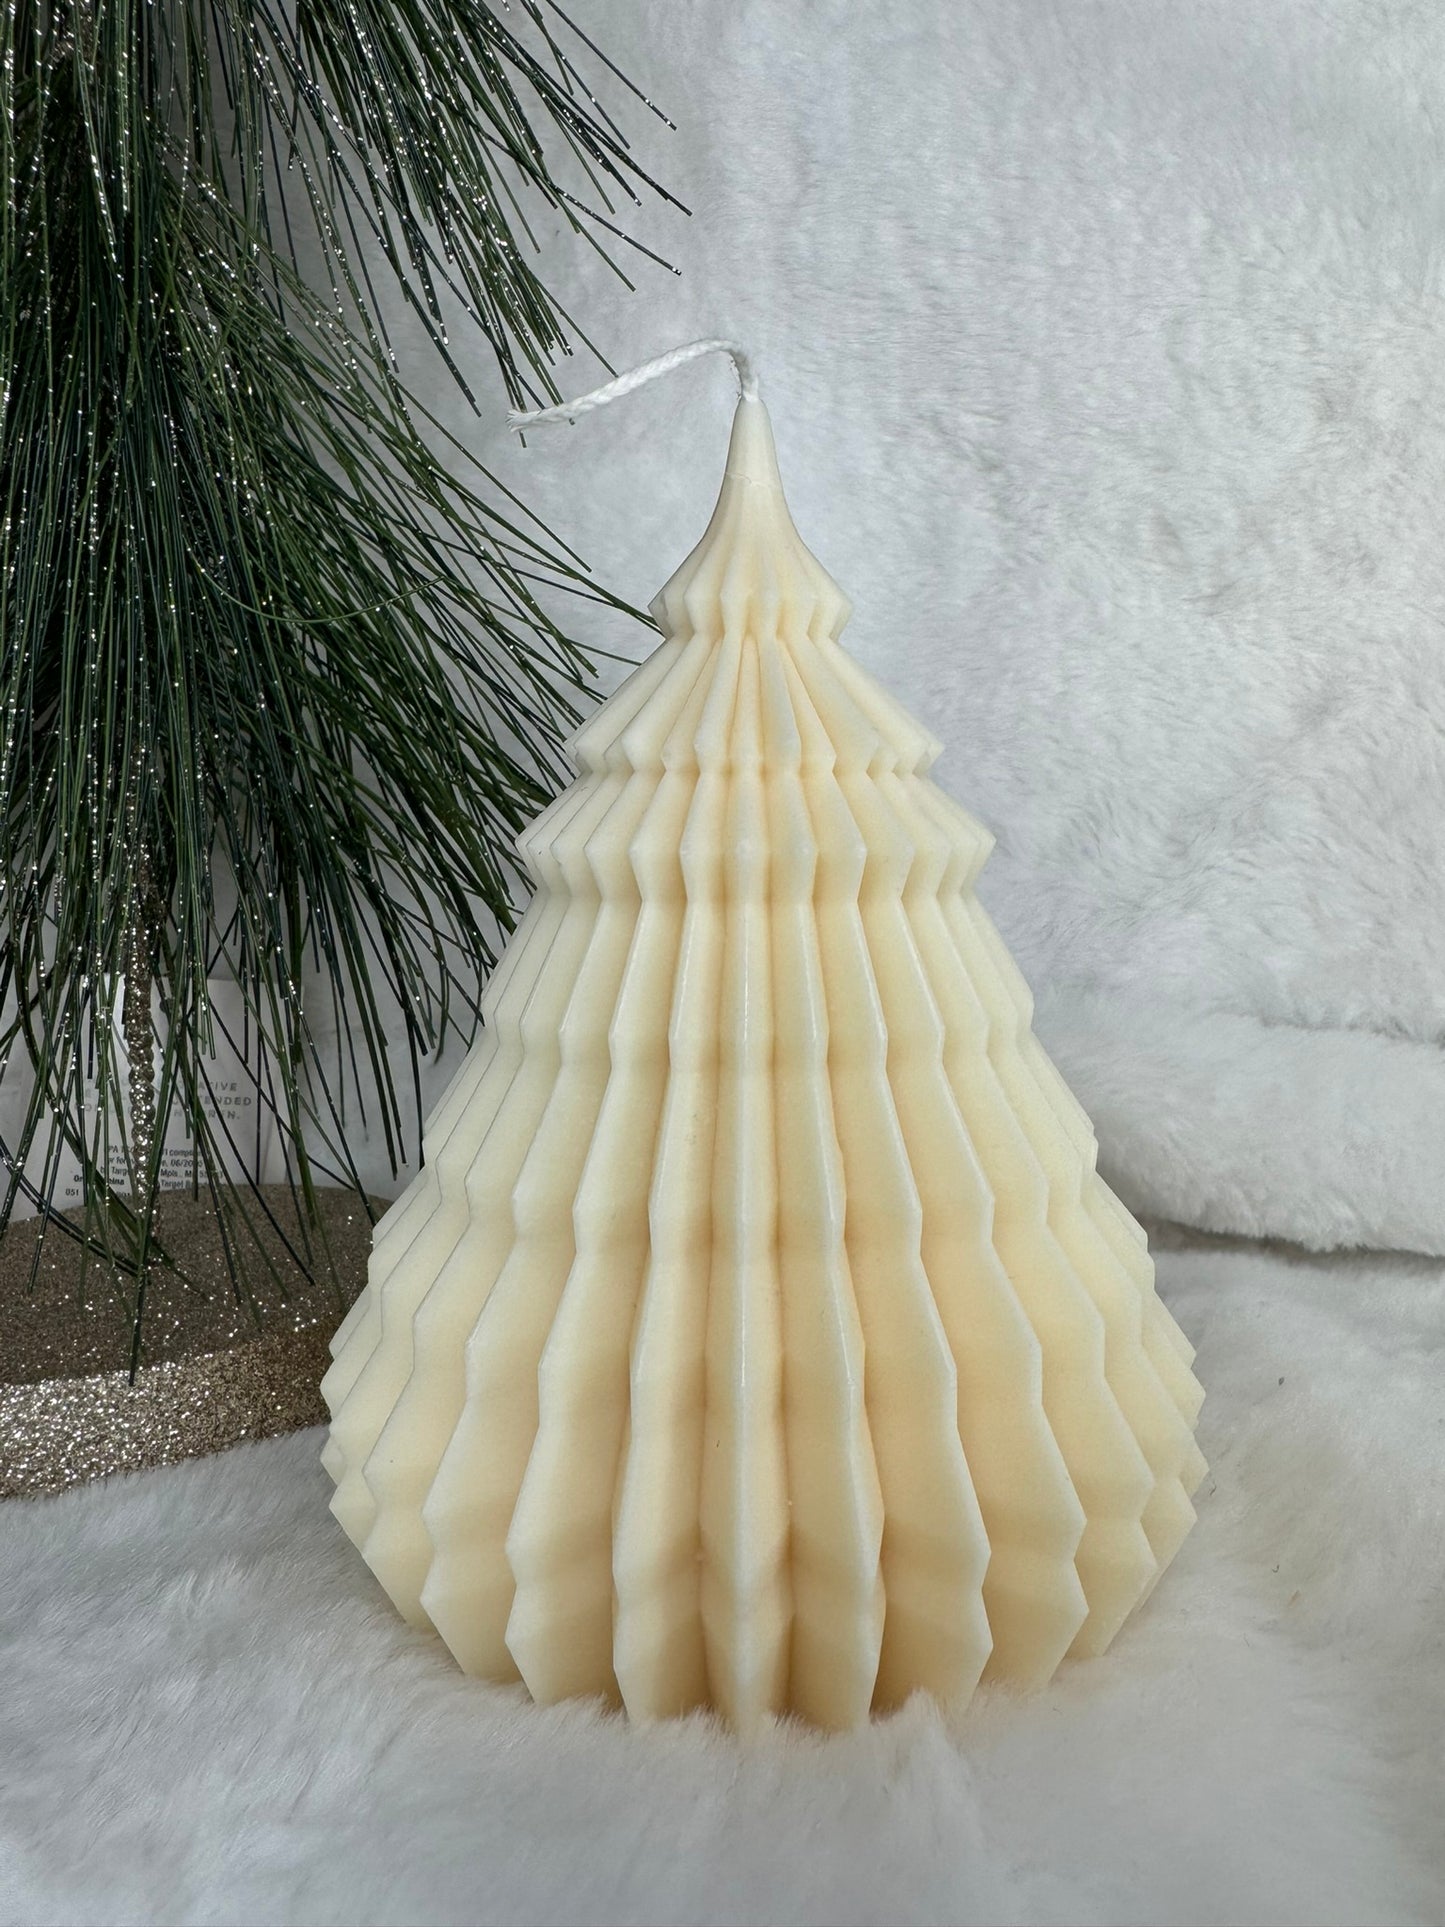 Christmas Spruce Tree Candle